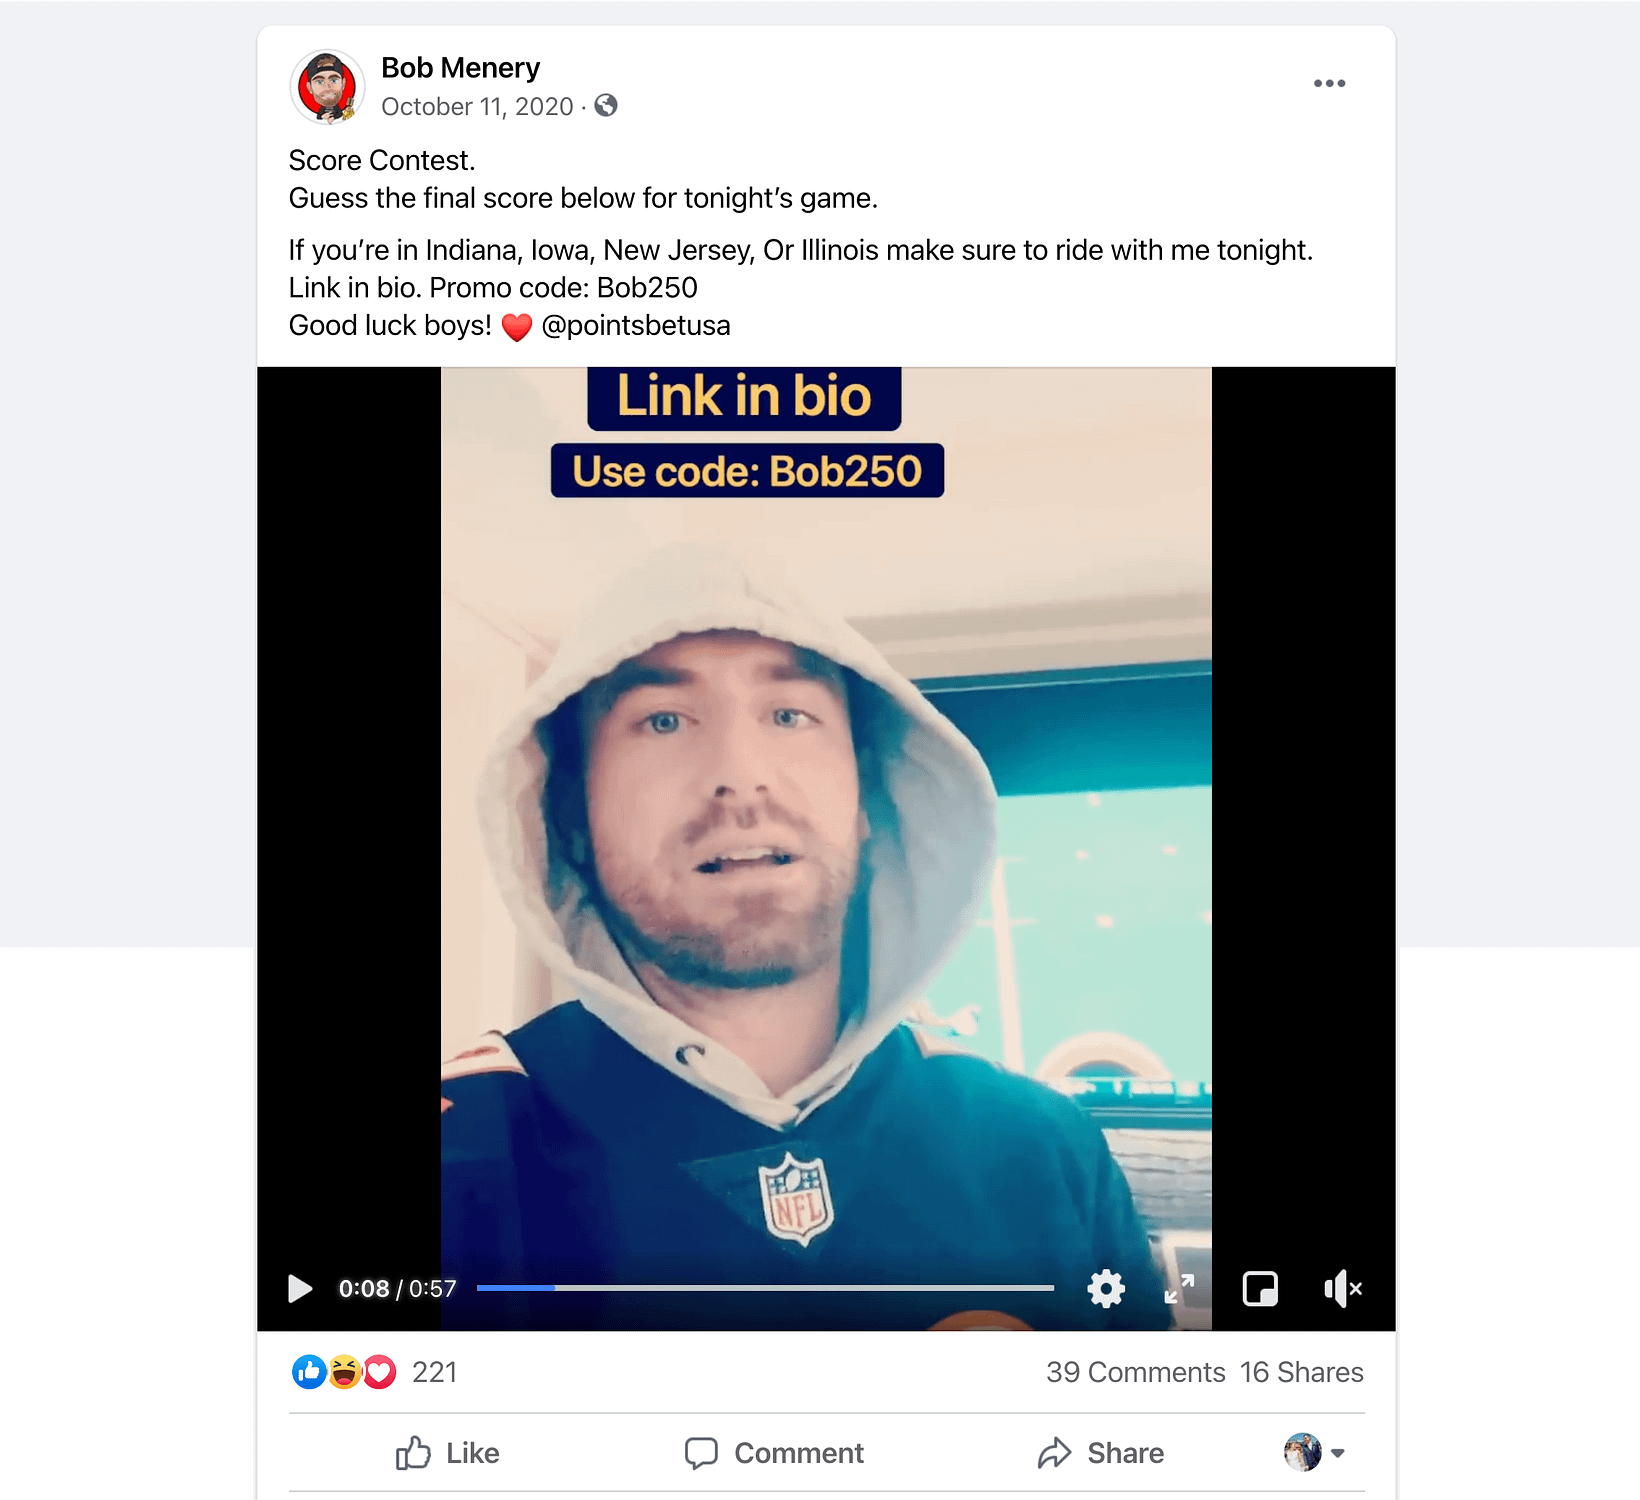 Sometimes a video announcement works better than text for a Facebook contest